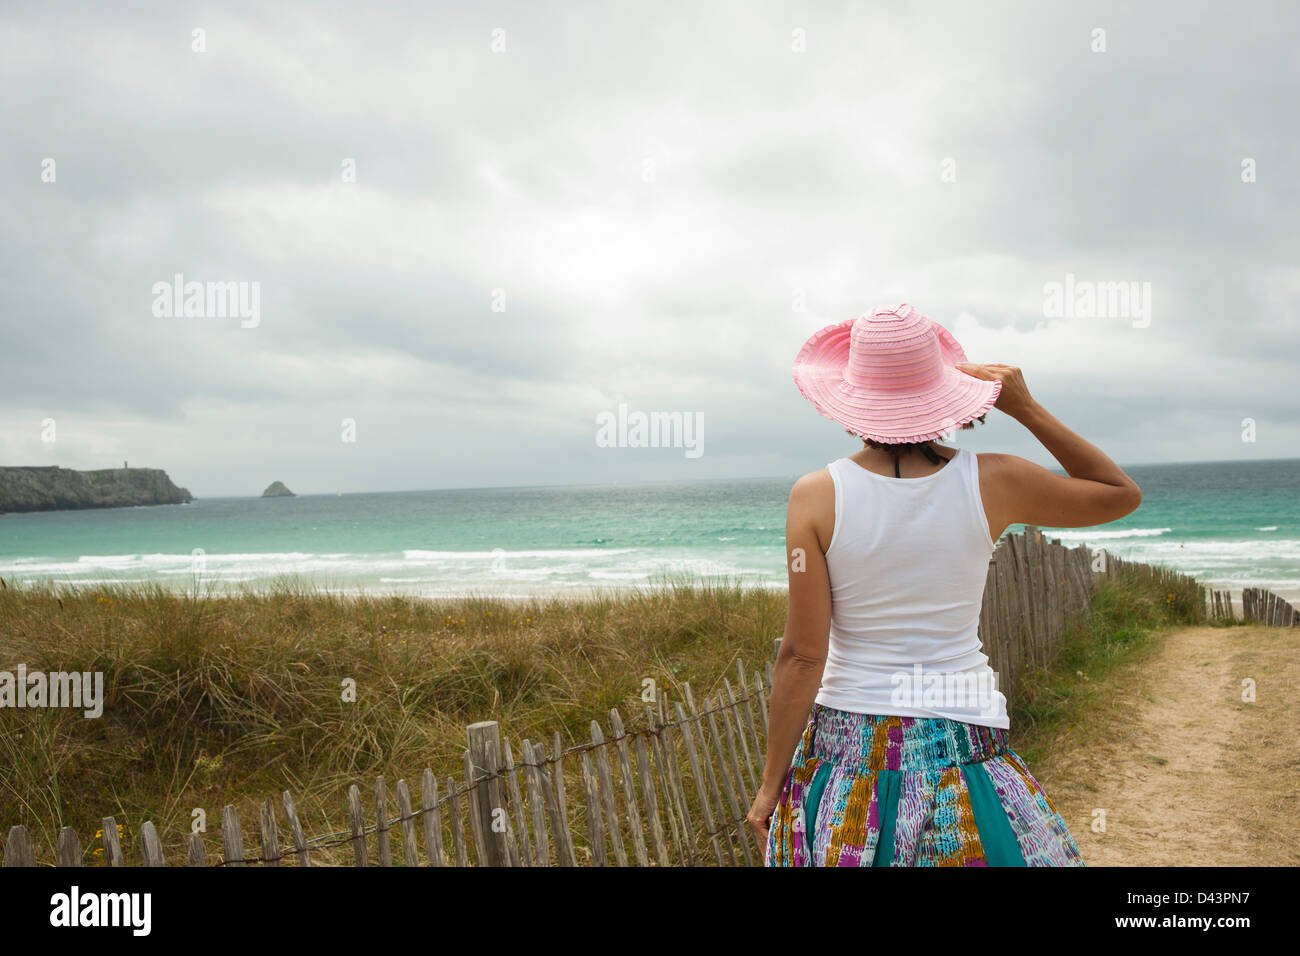 Rear View of Woman on Beach, Camaret-sur-Mer, Crozon Peninsula, Finistere, Brittany, France Stock Photo